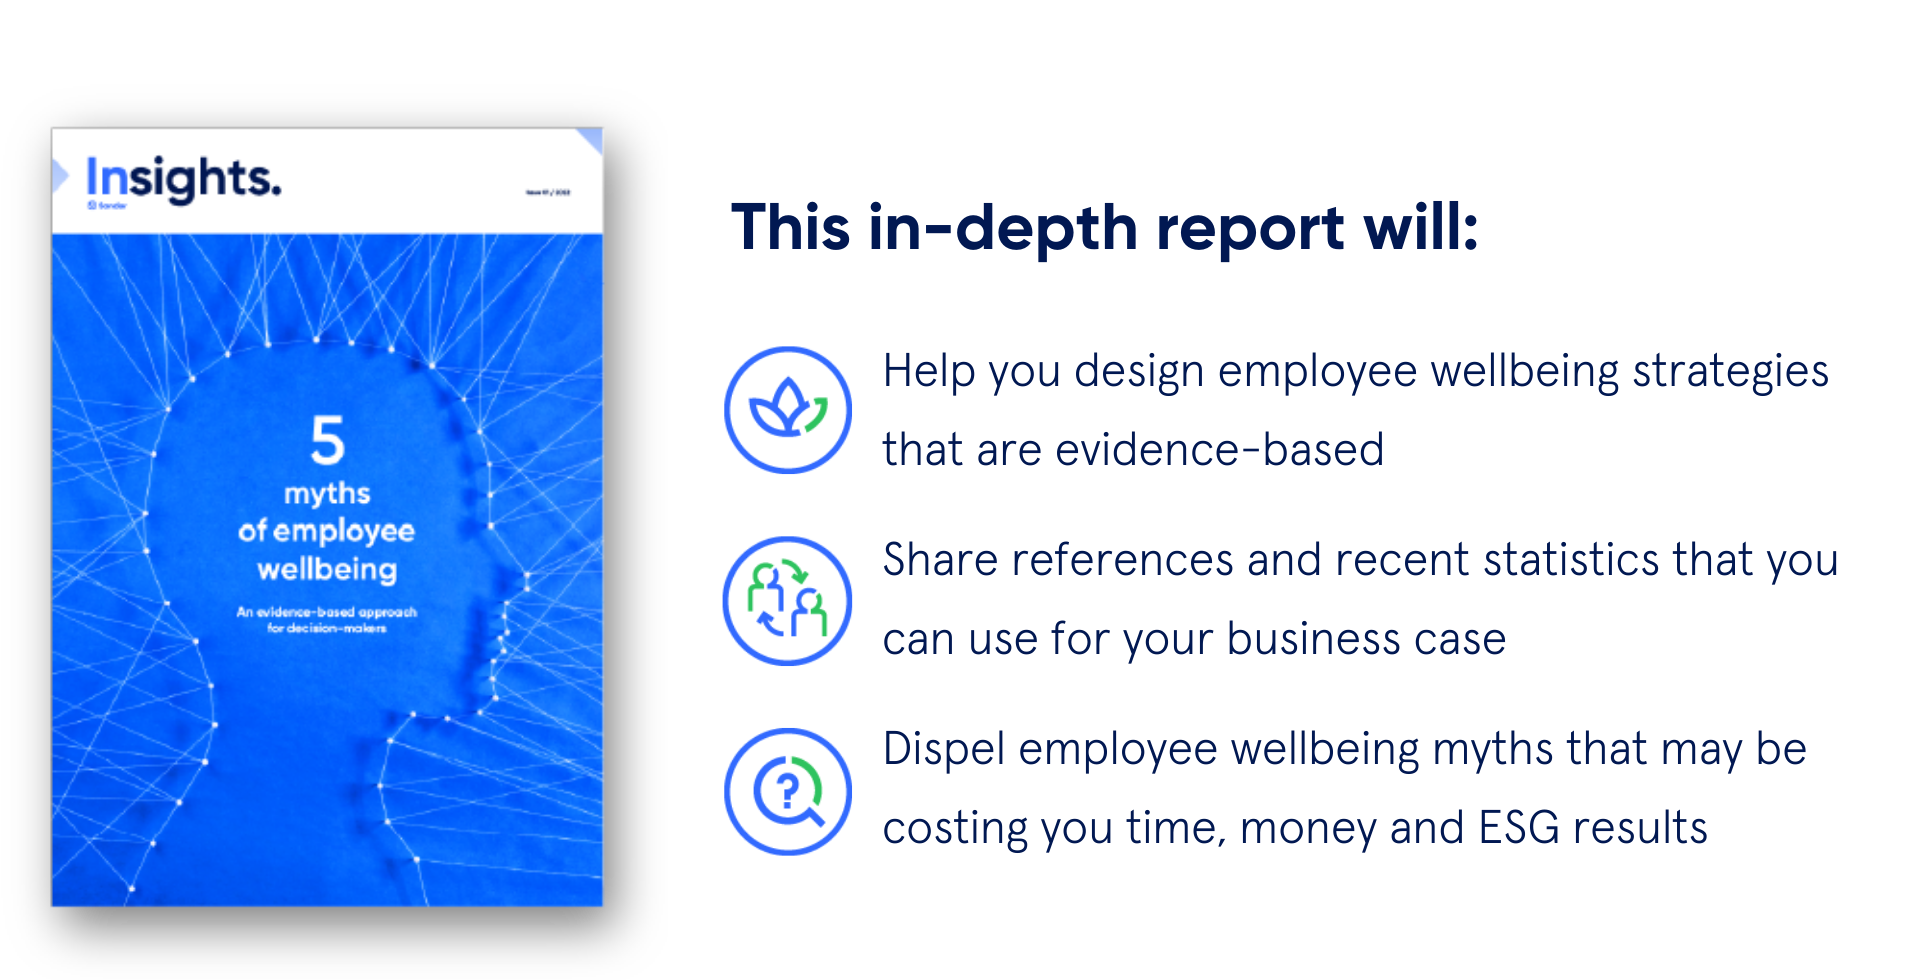 This in-depth report will Help you design employee wellbeing strategies that are evidence-based Share references and recent statistics that you can use for your business case Dispel employee wellbeing myths that may  (6)